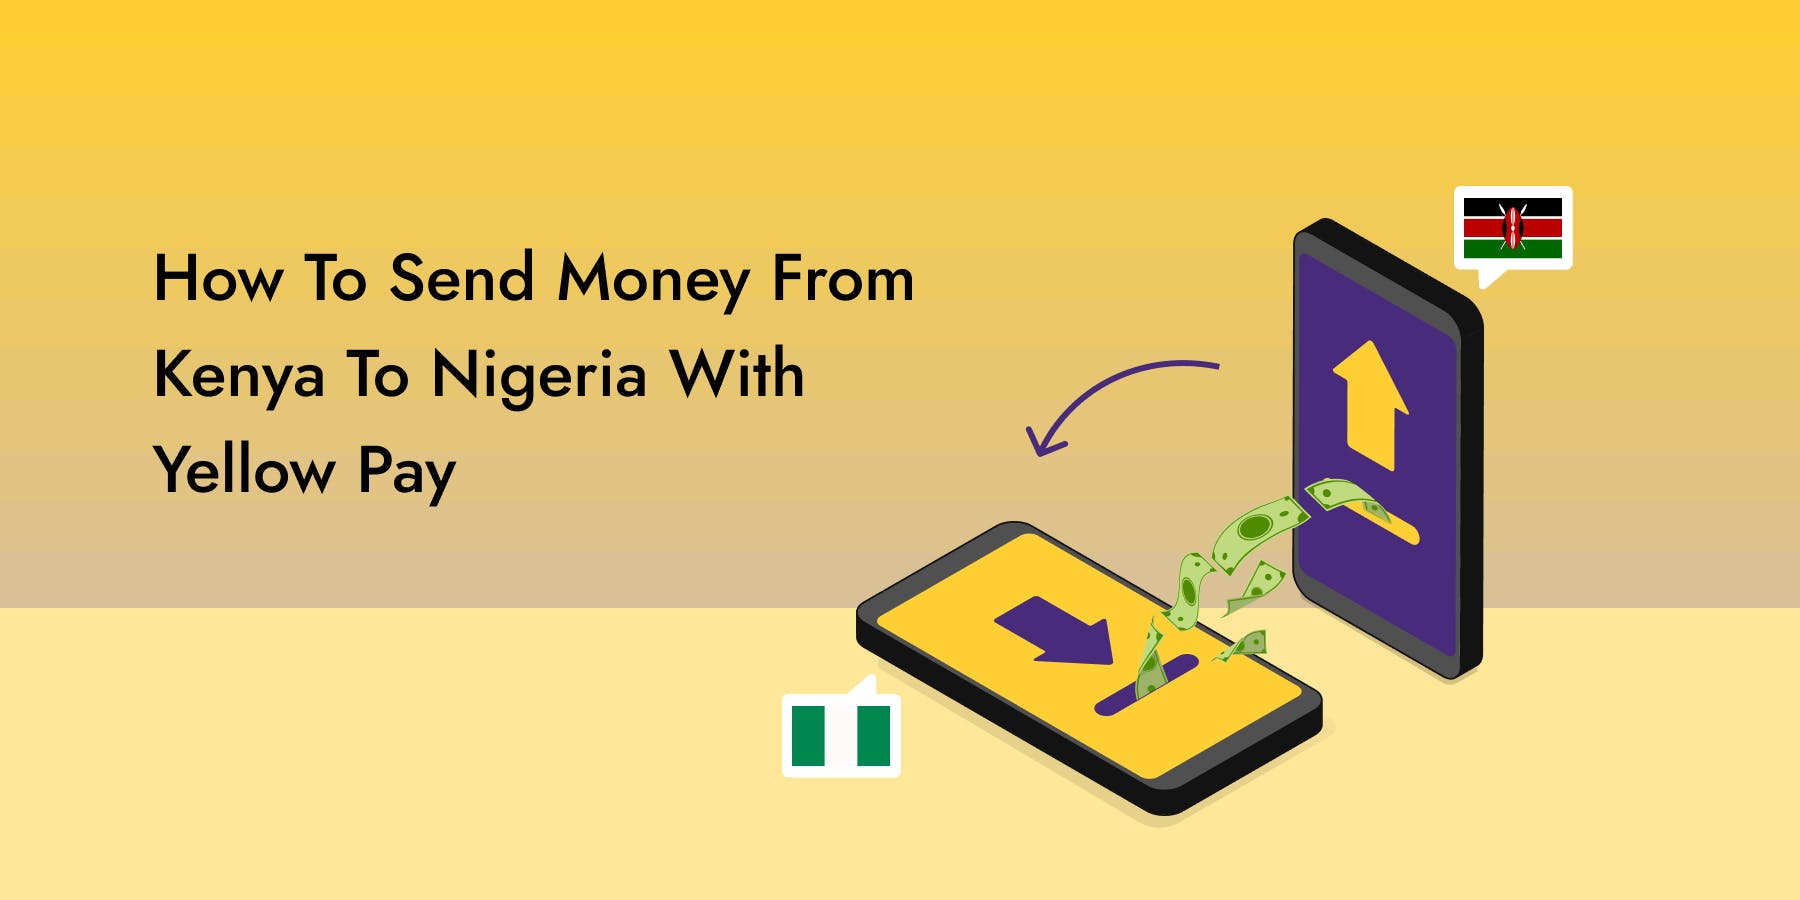 How To Send Money From Kenya To Nigeria With Yellow Pay